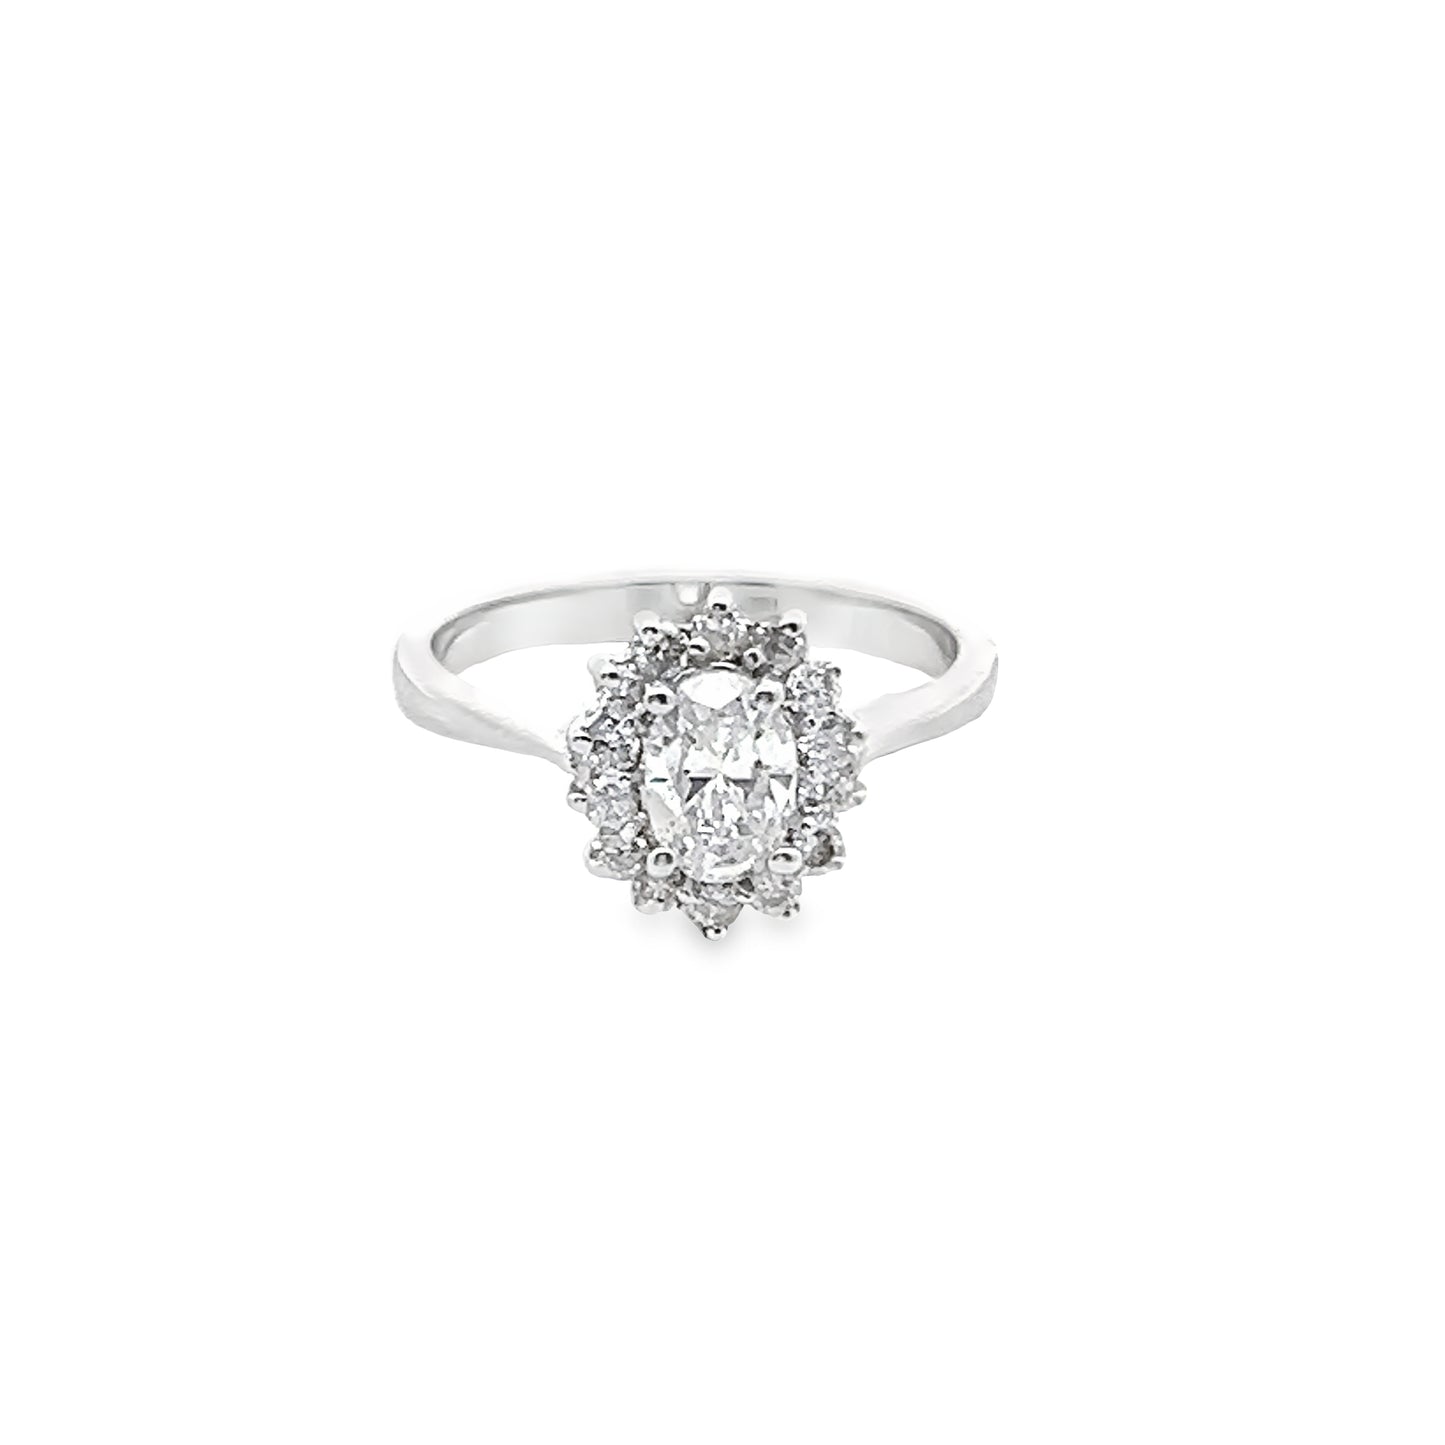 Diamond Oval-Cut Ring with Diamond Halo in 14k White Gold